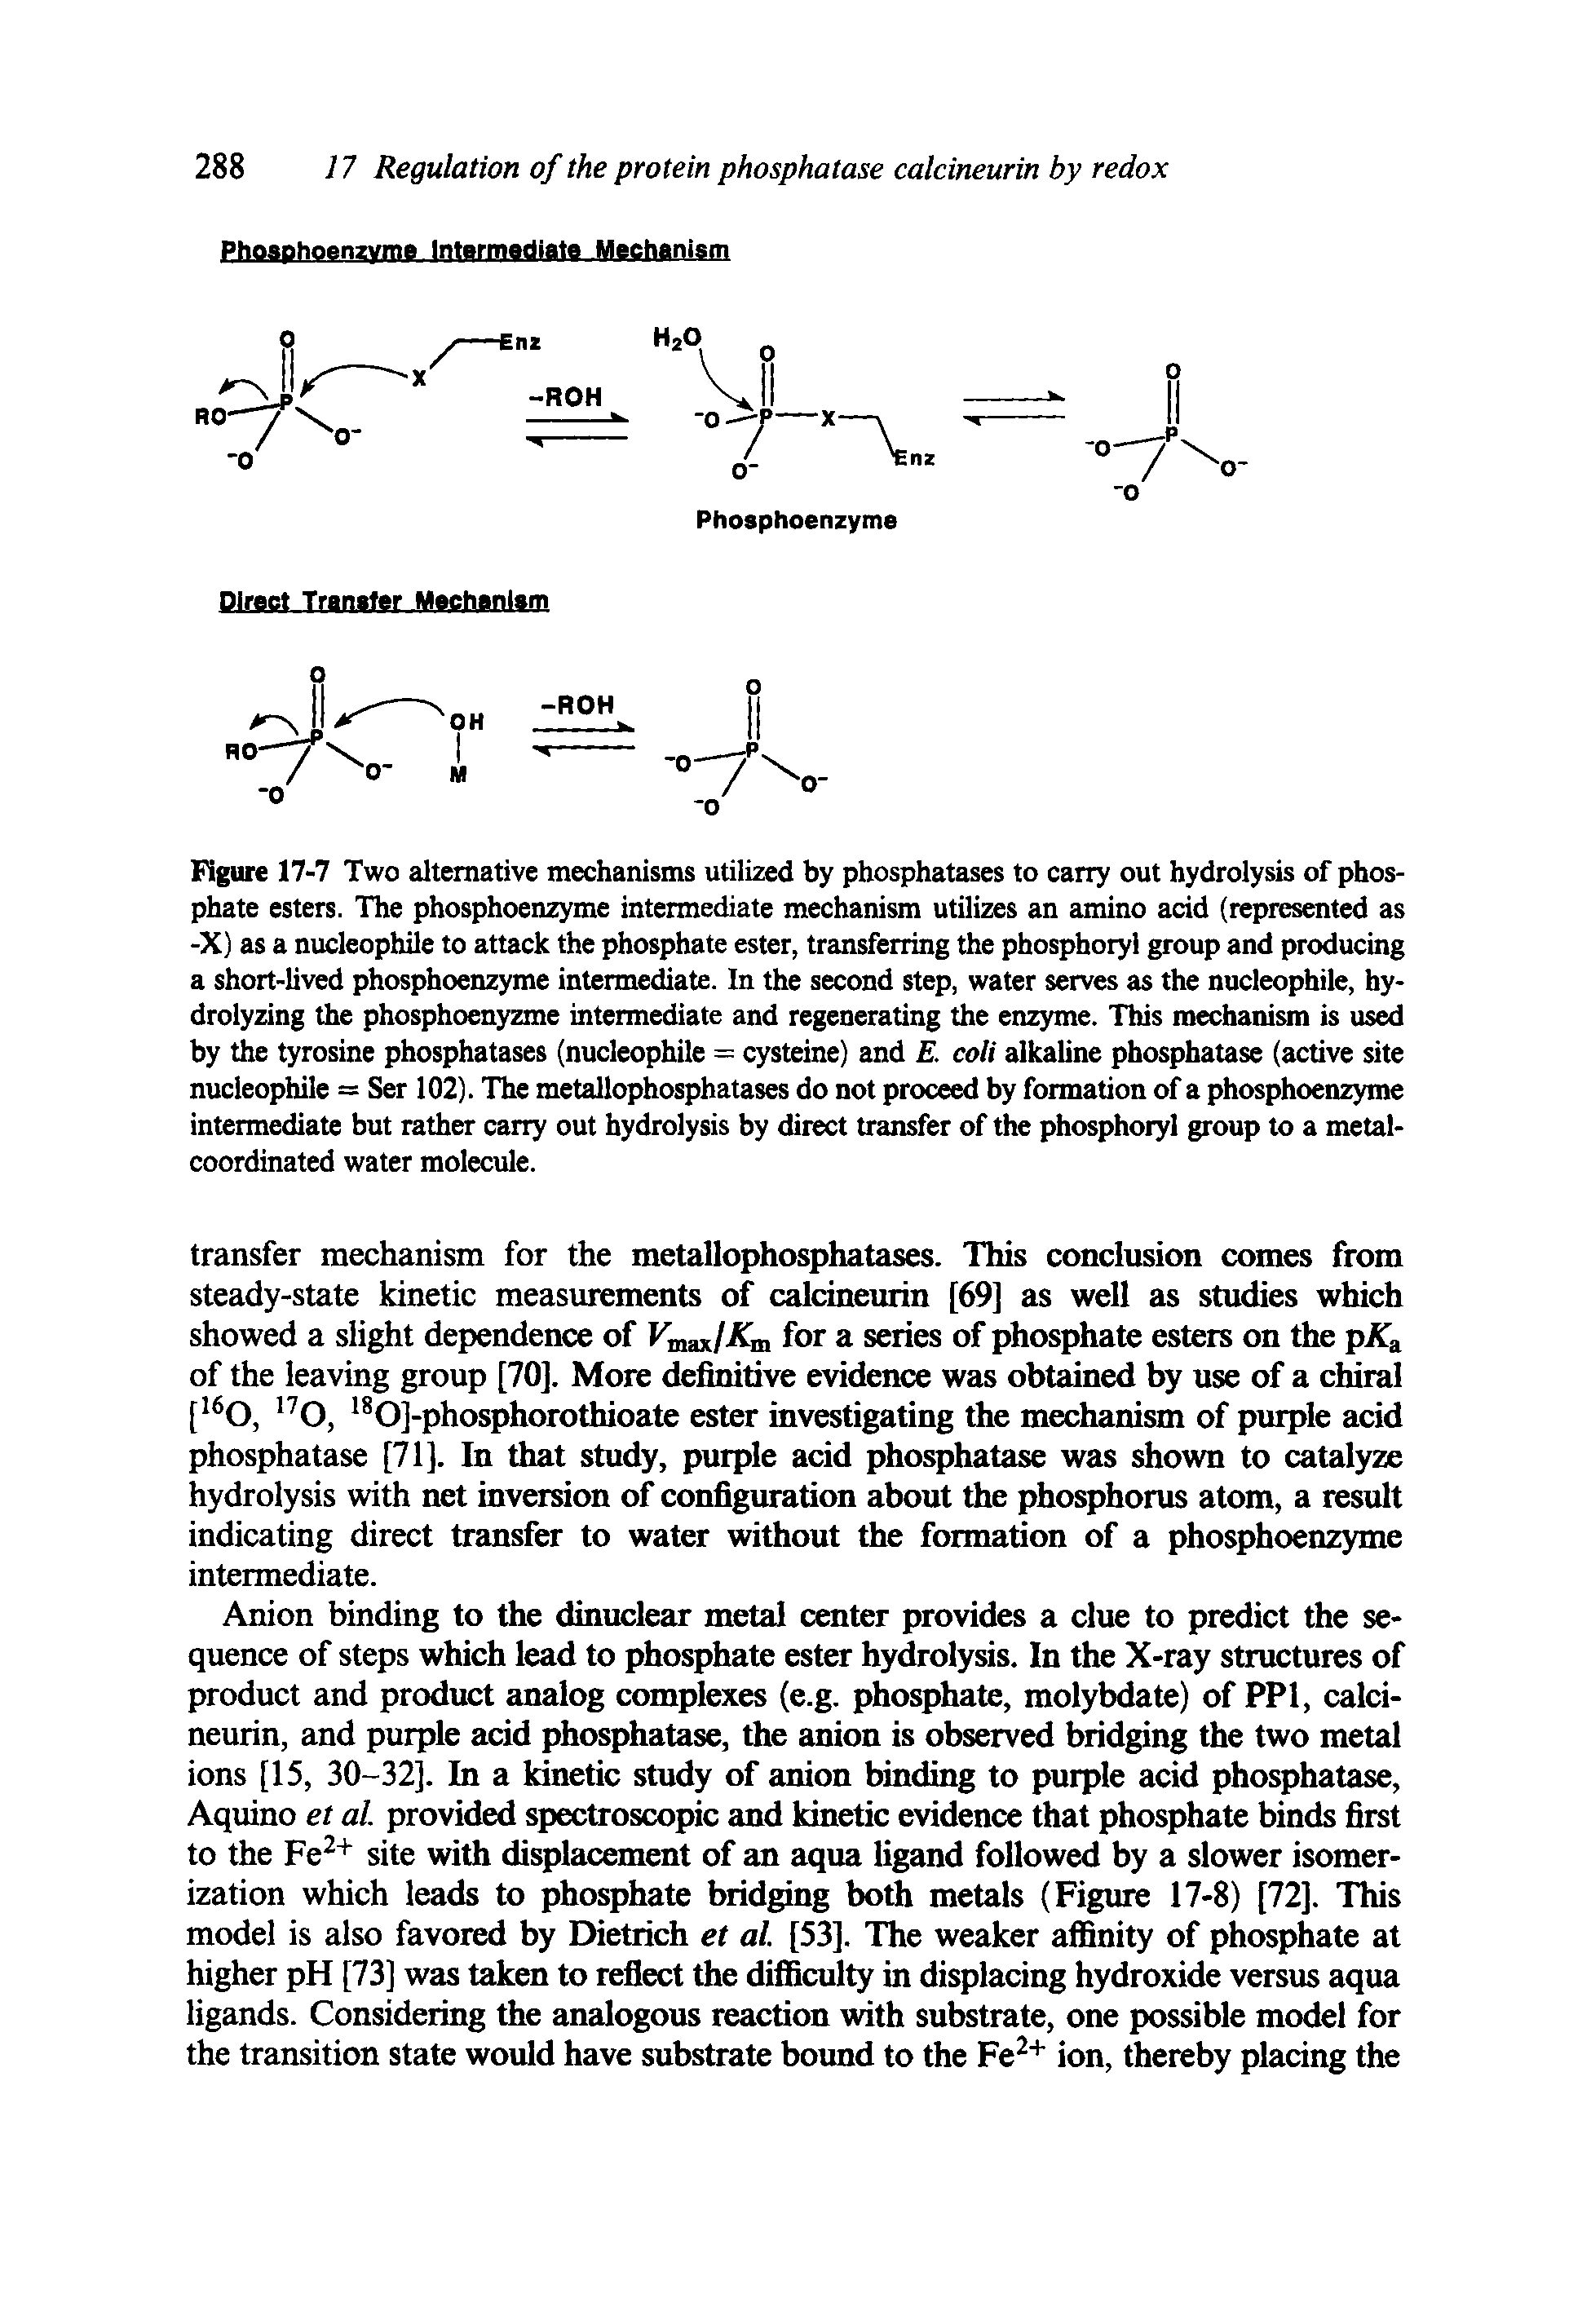 Figure 17-7 Two alternative mechanisms utilized by phosphatases to carry out hydrolysis of phosphate esters. The phosphoenzyme intermediate mechanism utilizes an amino acid (represented as -X] as a nucleophile to attack the phosphate ester, transferring the phosphoryi group and producing a short-lived phosphoenzyme intermediate. In the second step, water serves as the nucleophile, hydrolyzing the phosphoenyzme intermediate and regenerating the enzyme. This mechanism is used by the tyrosine phosphatases (nucleophile = cysteine) and E. coli alkaline phosphatase (active site nucleophile = Ser 102). The metallophosphatases do not proceed by formation of a phosphoenzyme intermediate but rather carry out hydrolysis by direct transfer of the phosphoryi group to a metal-coordinated water molecule.